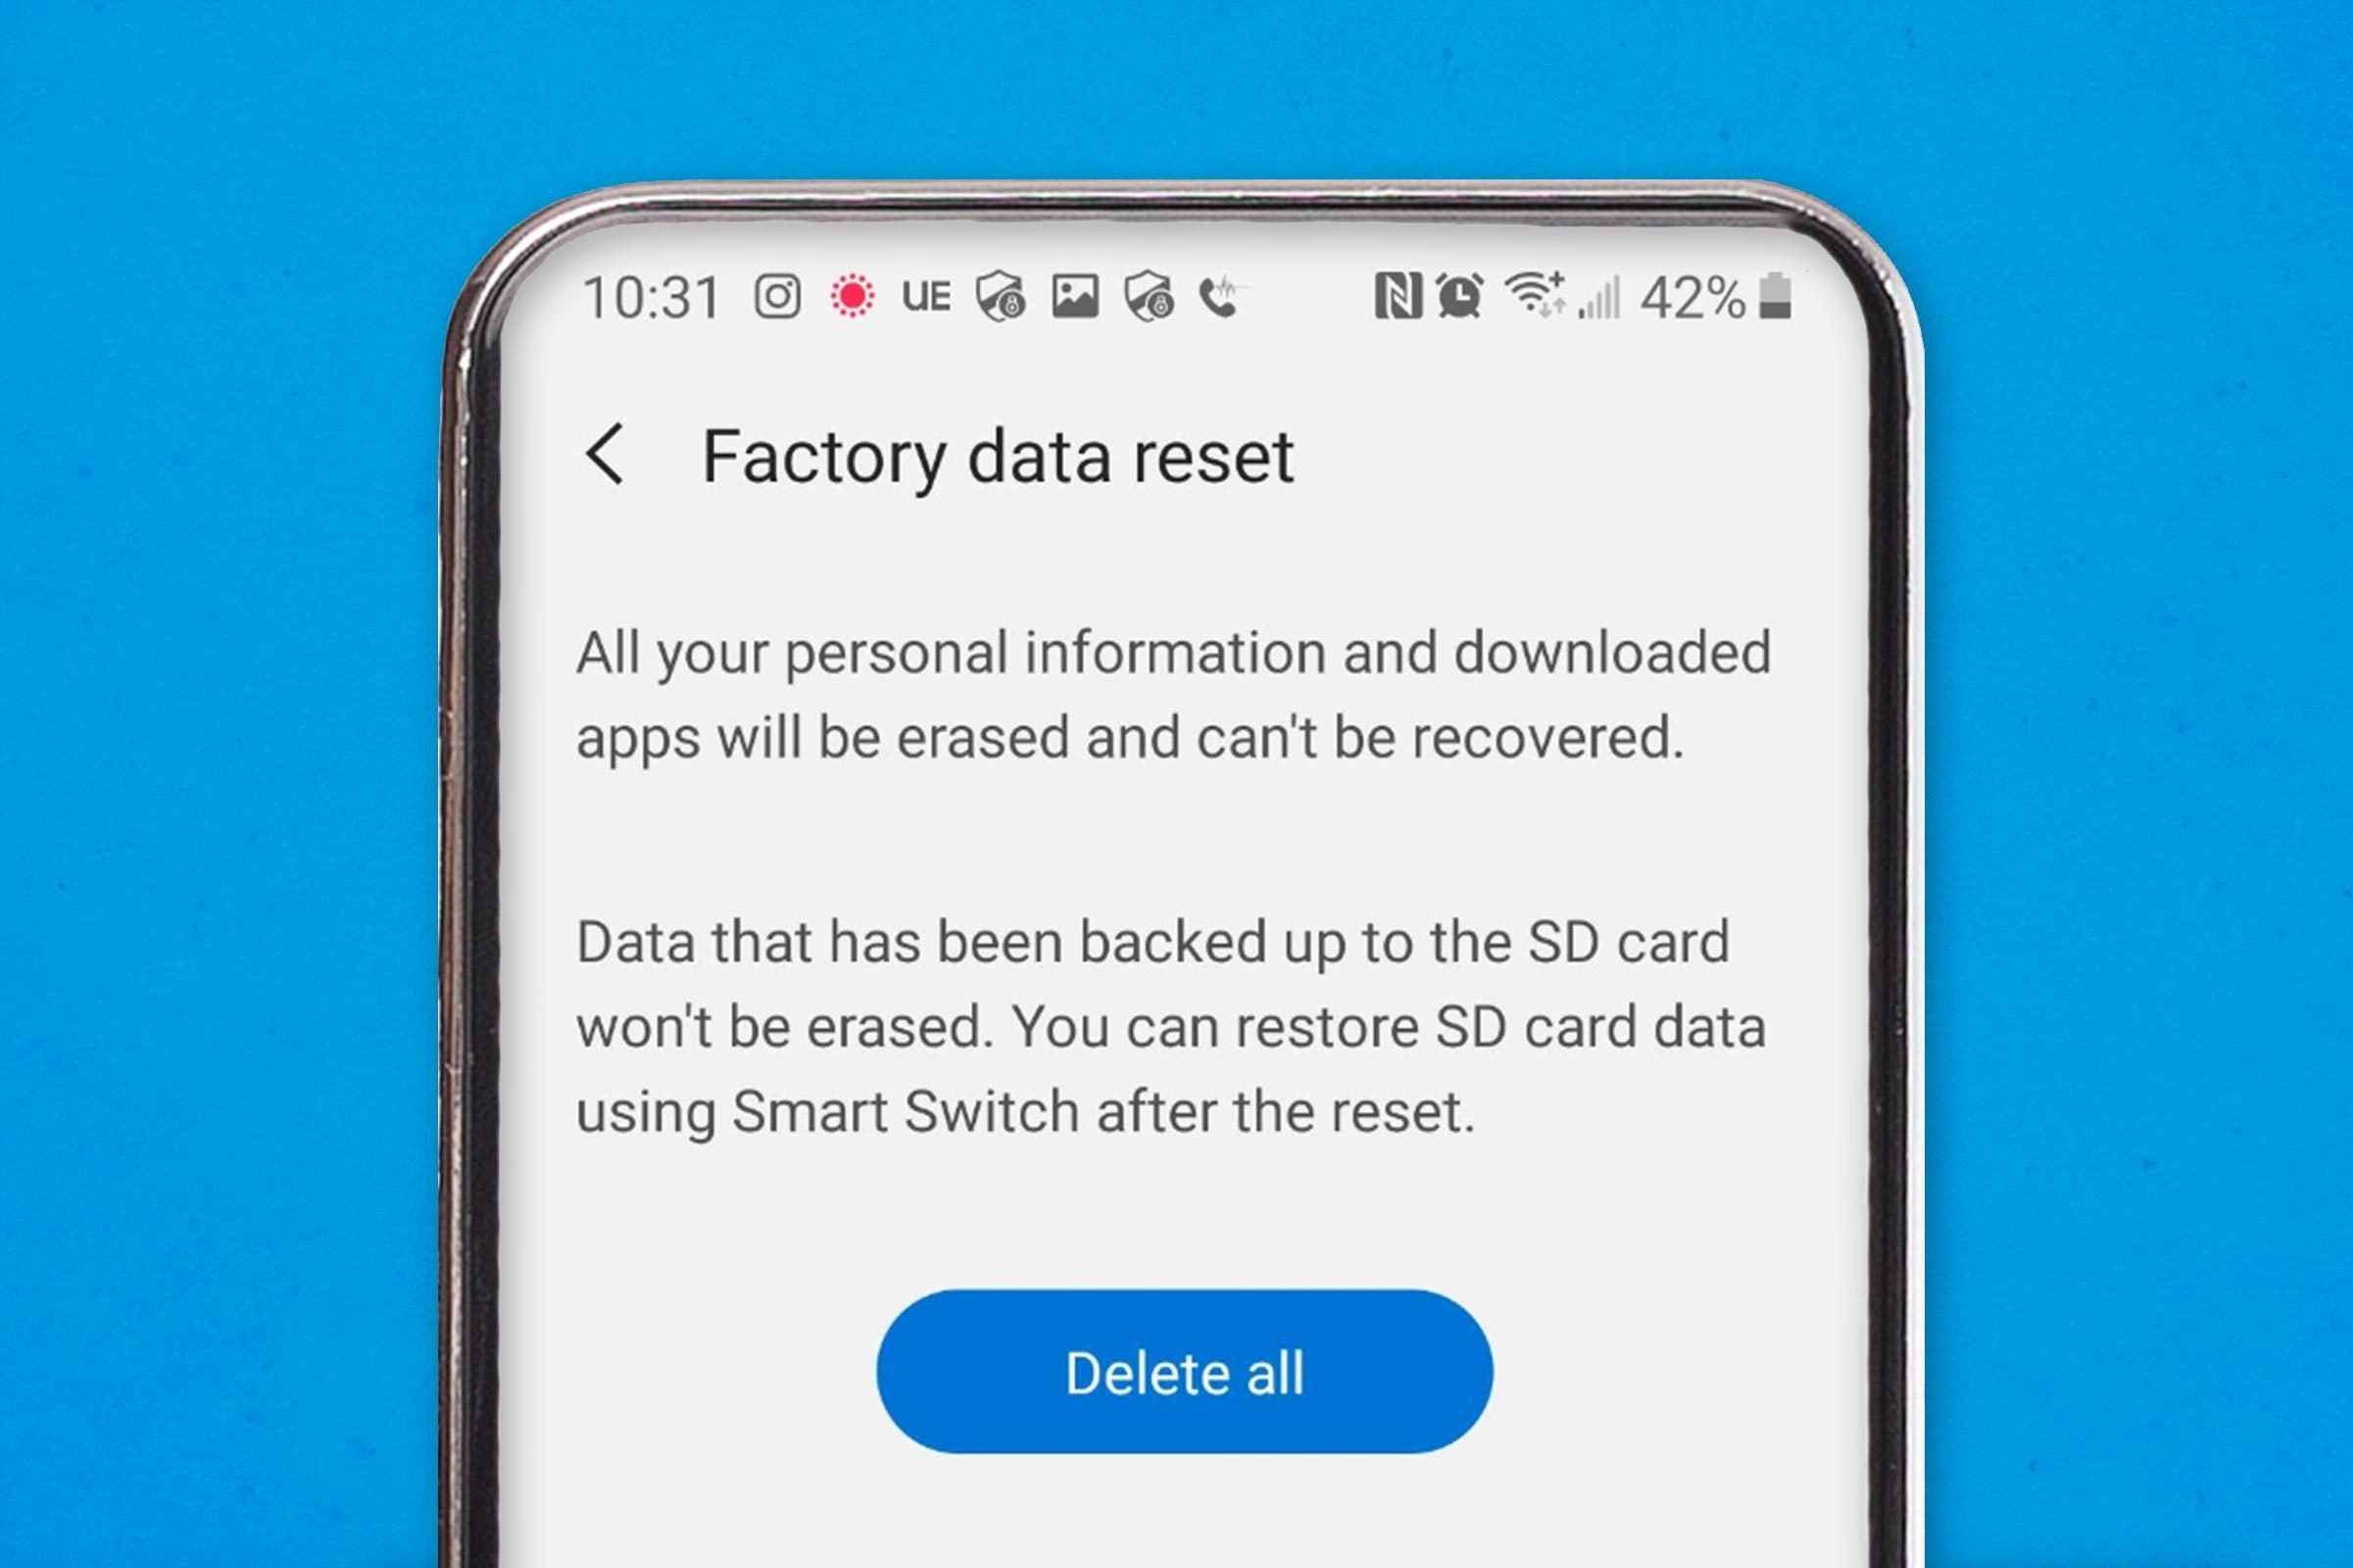 Android phone showing the factory reset settings menu